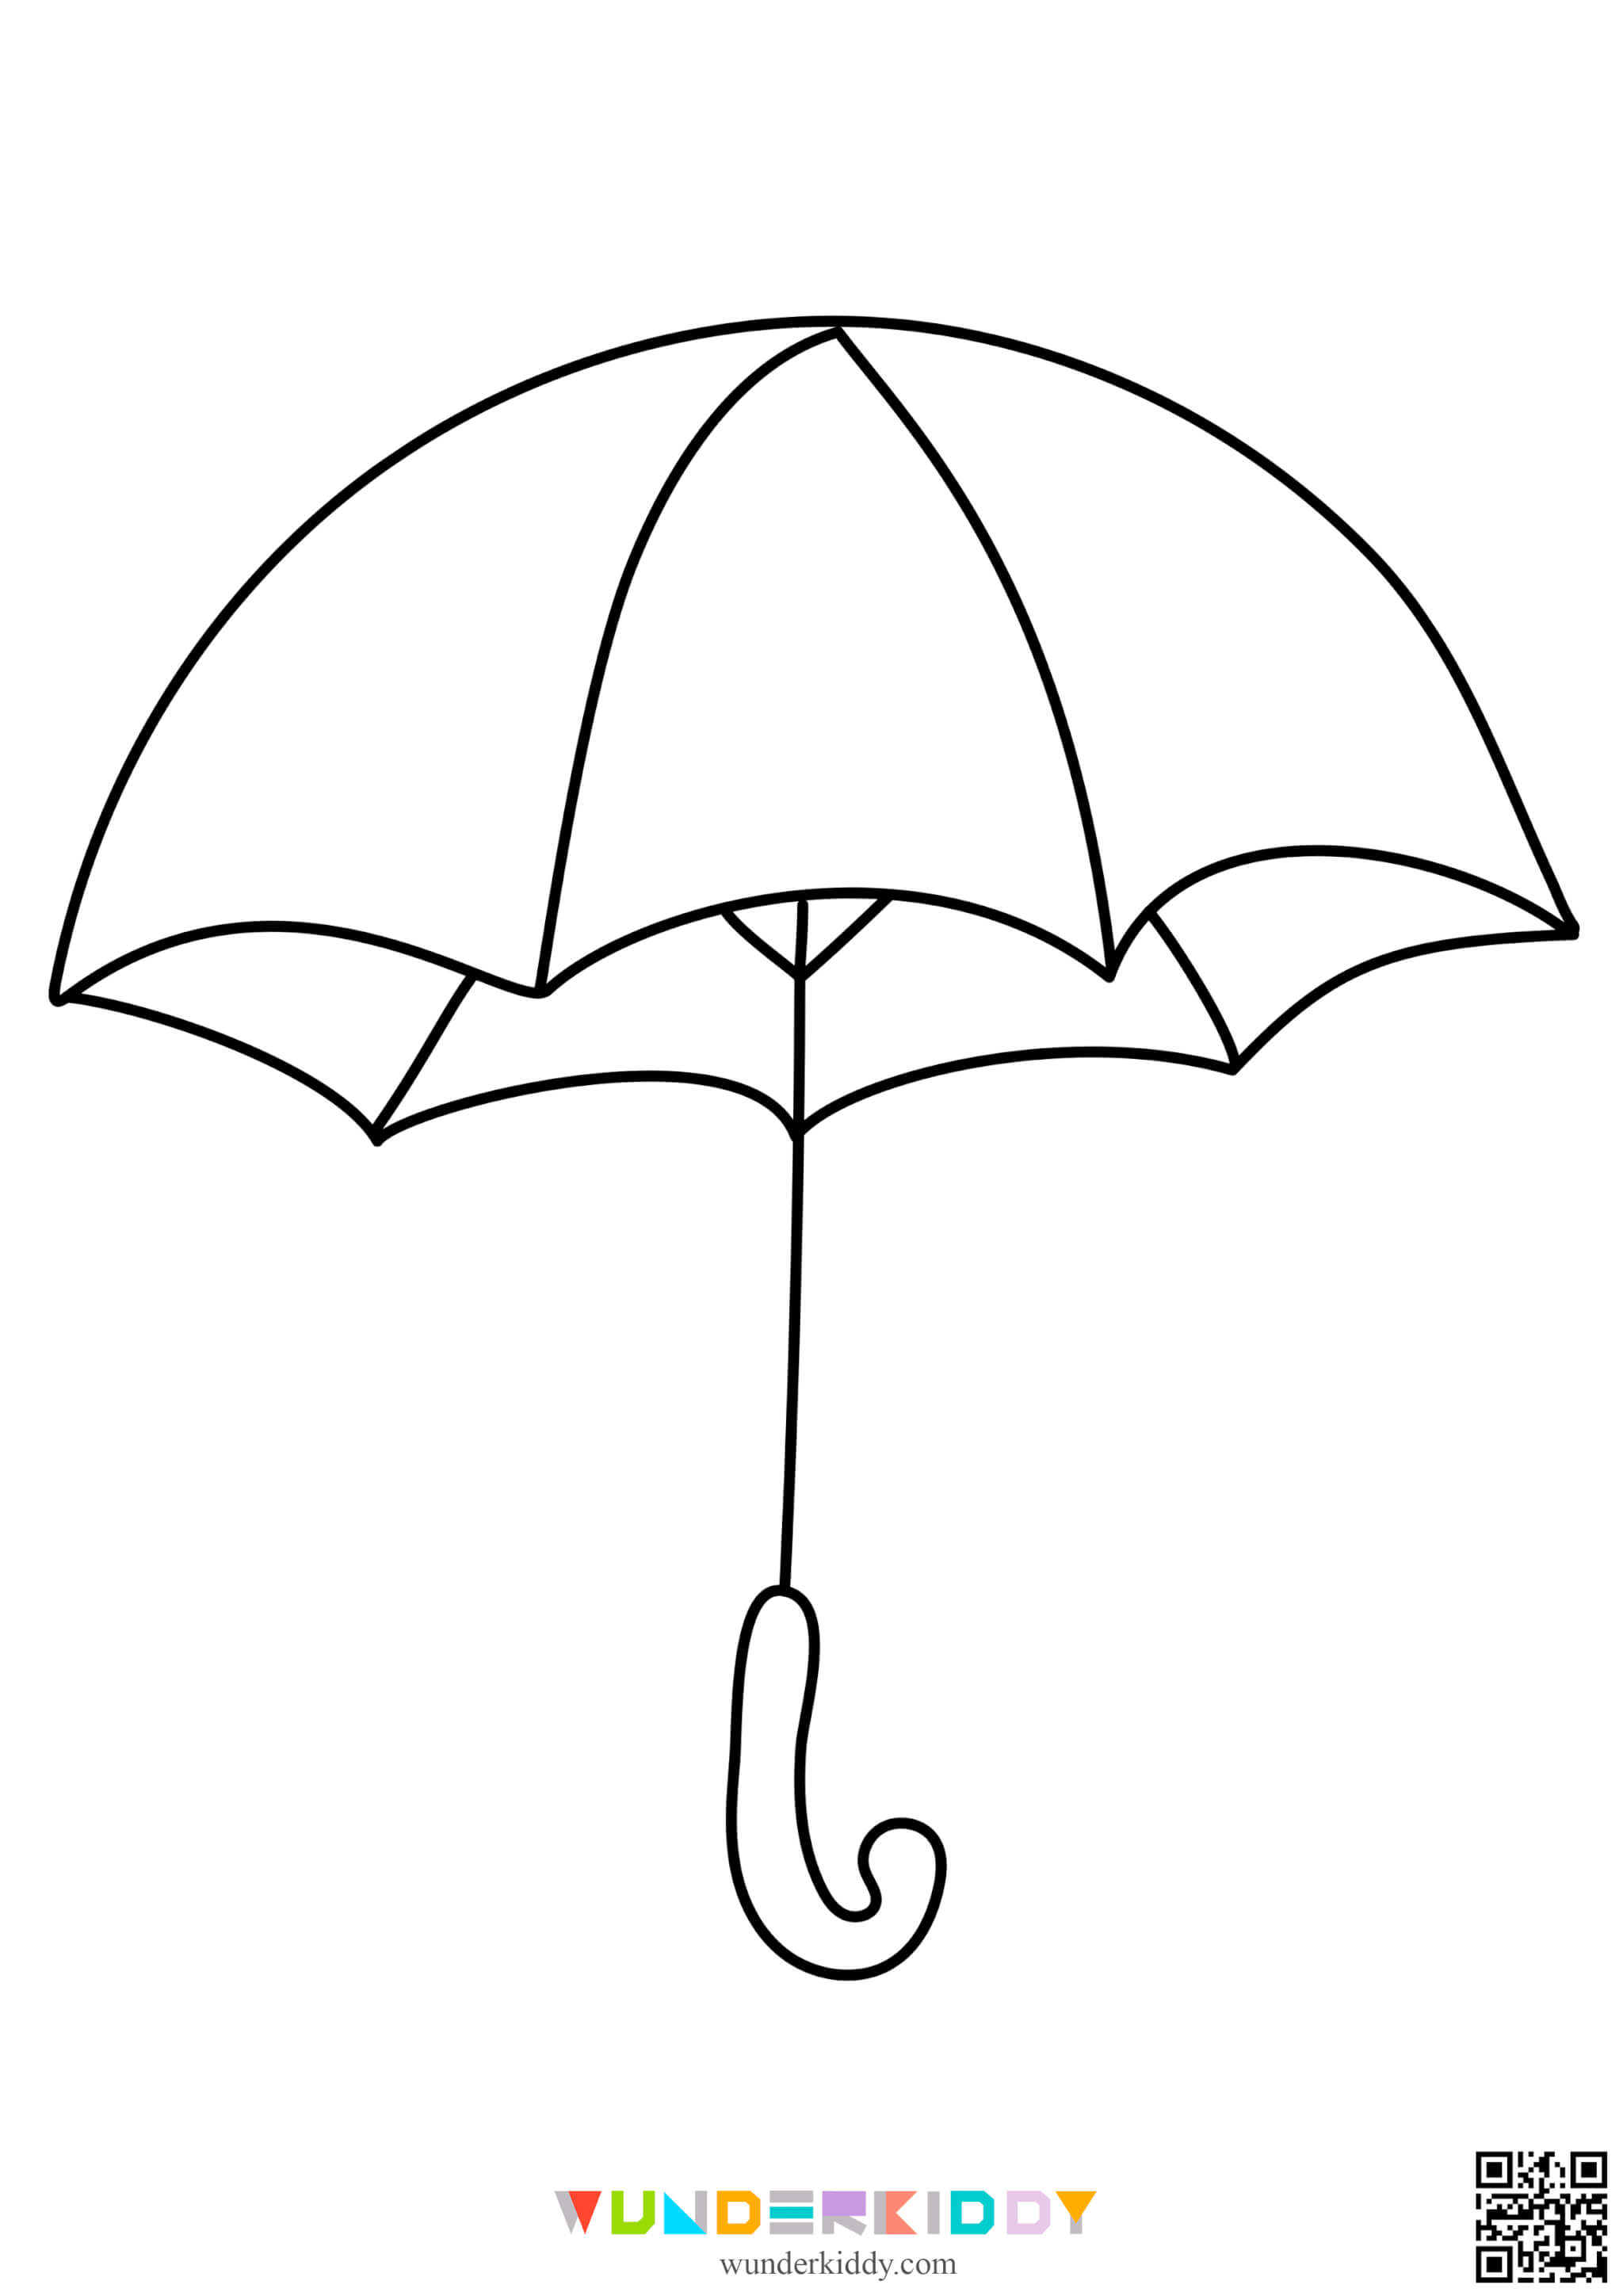 Umbrella Coloring Pages for Kids - Image 11